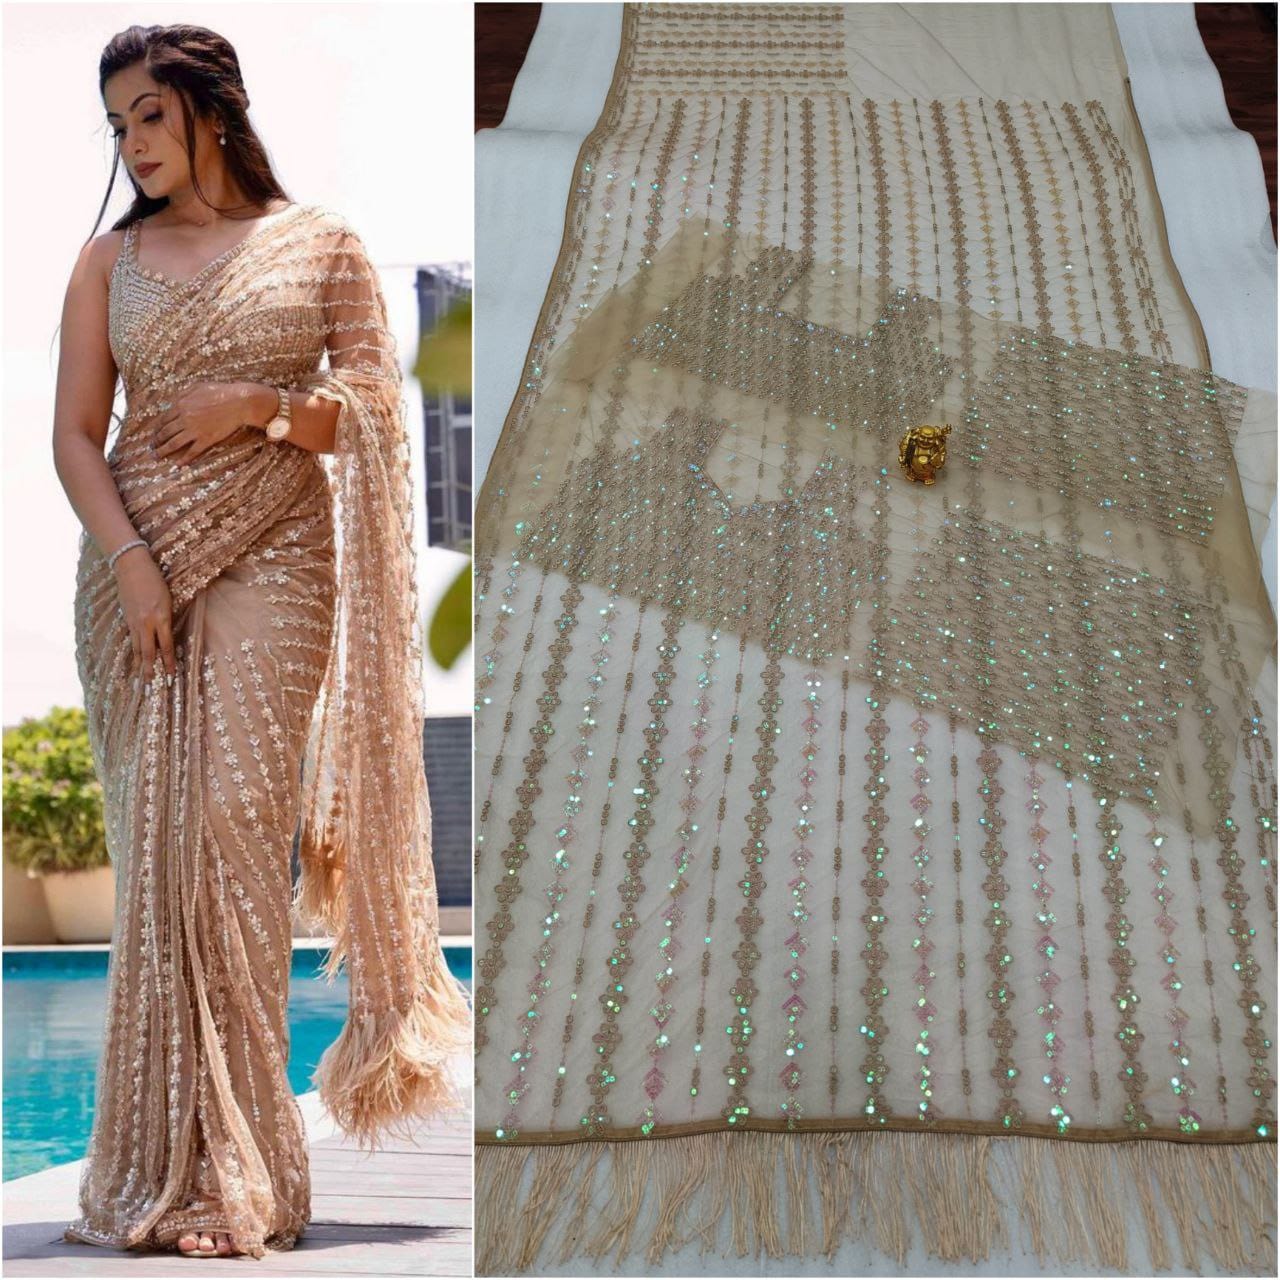 Manali designer saree Gray New Bollywood Blockbuster 5MM Sequins and Multy Embroidery Net Saree with Embroidered Net Blouse